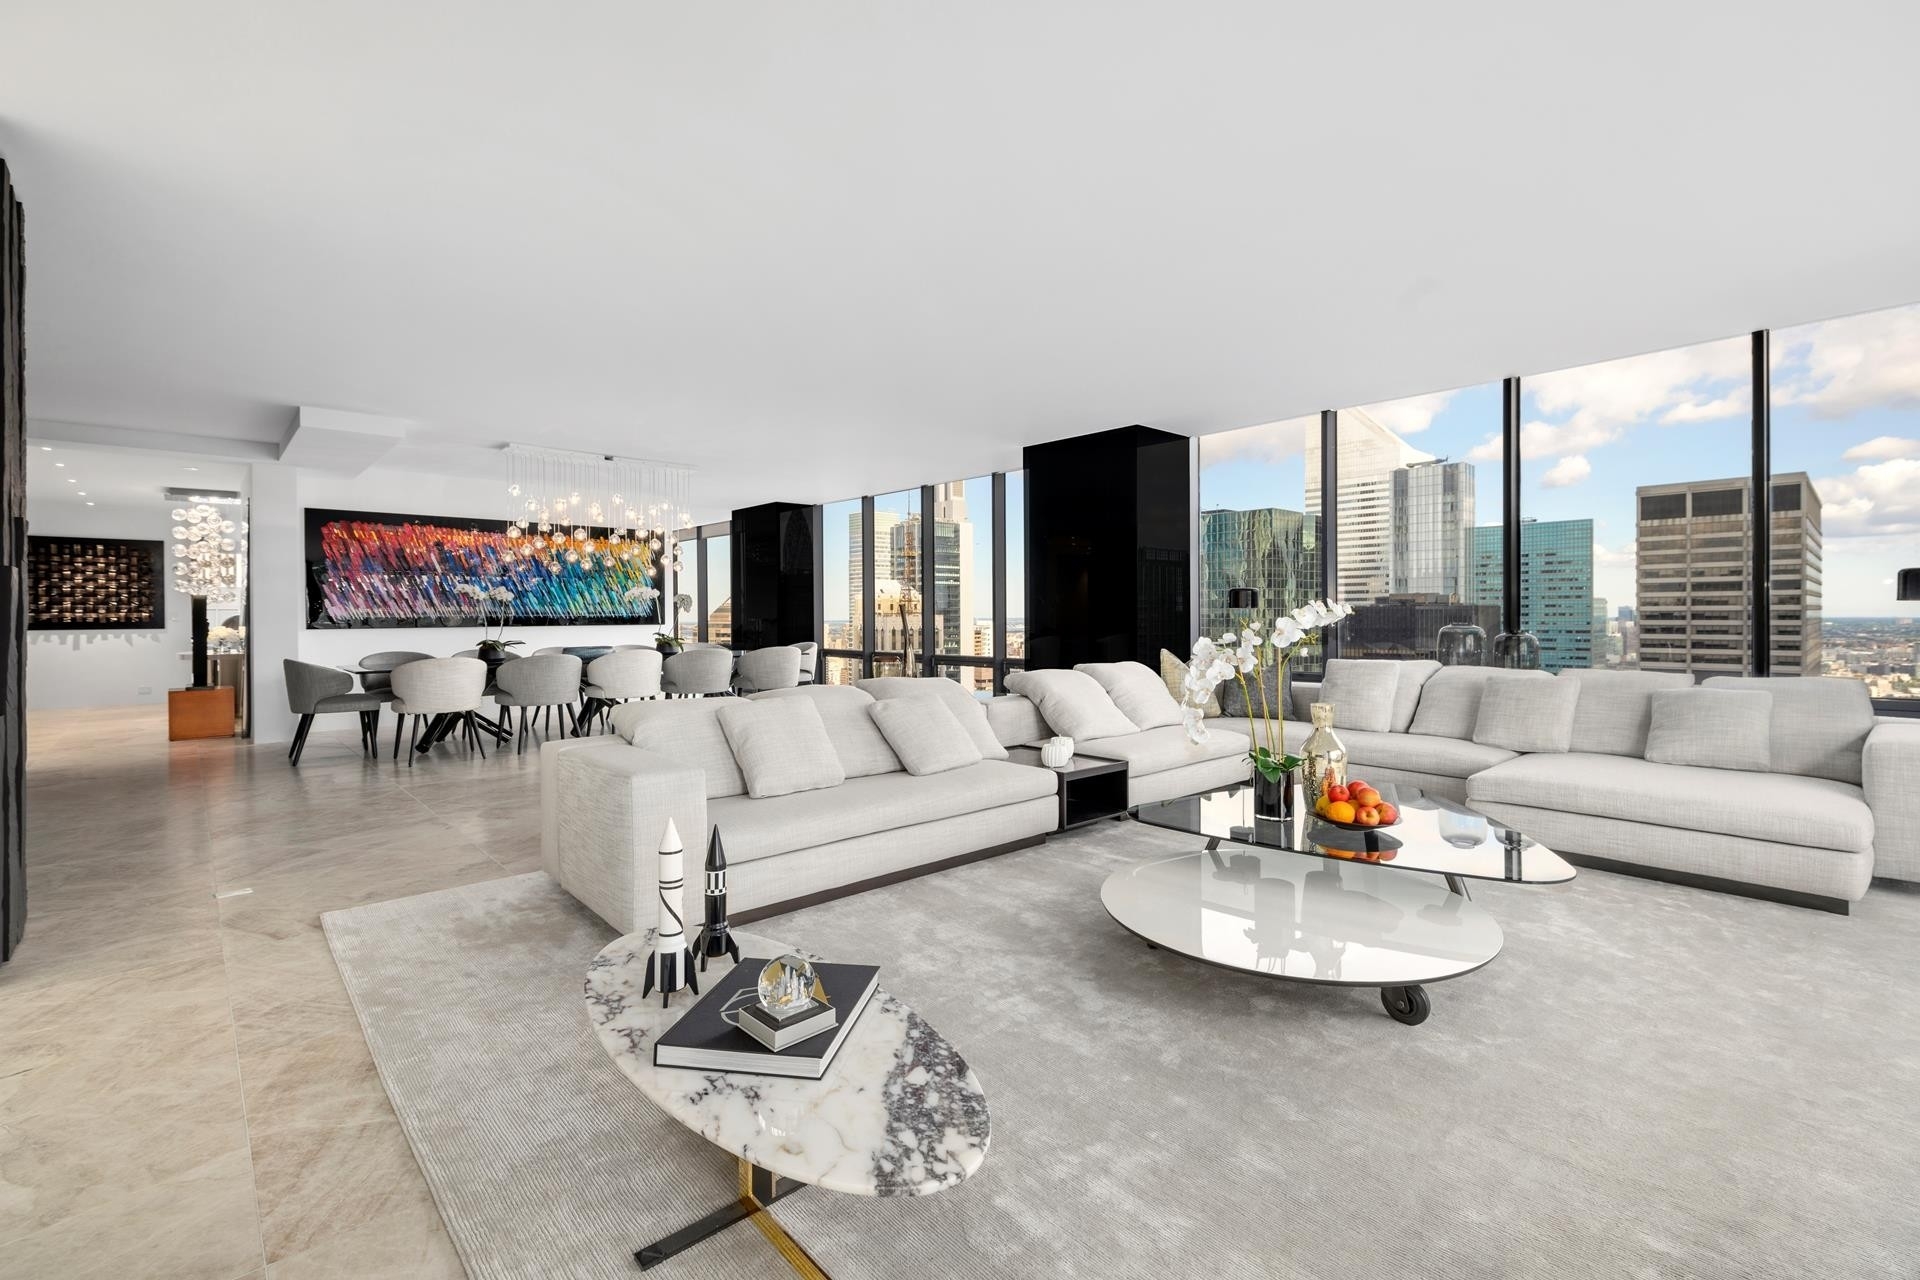 Condominium for Sale at Olympic Tower, 641 FIFTH AVE, 42DE Midtown East, New York, NY 10022